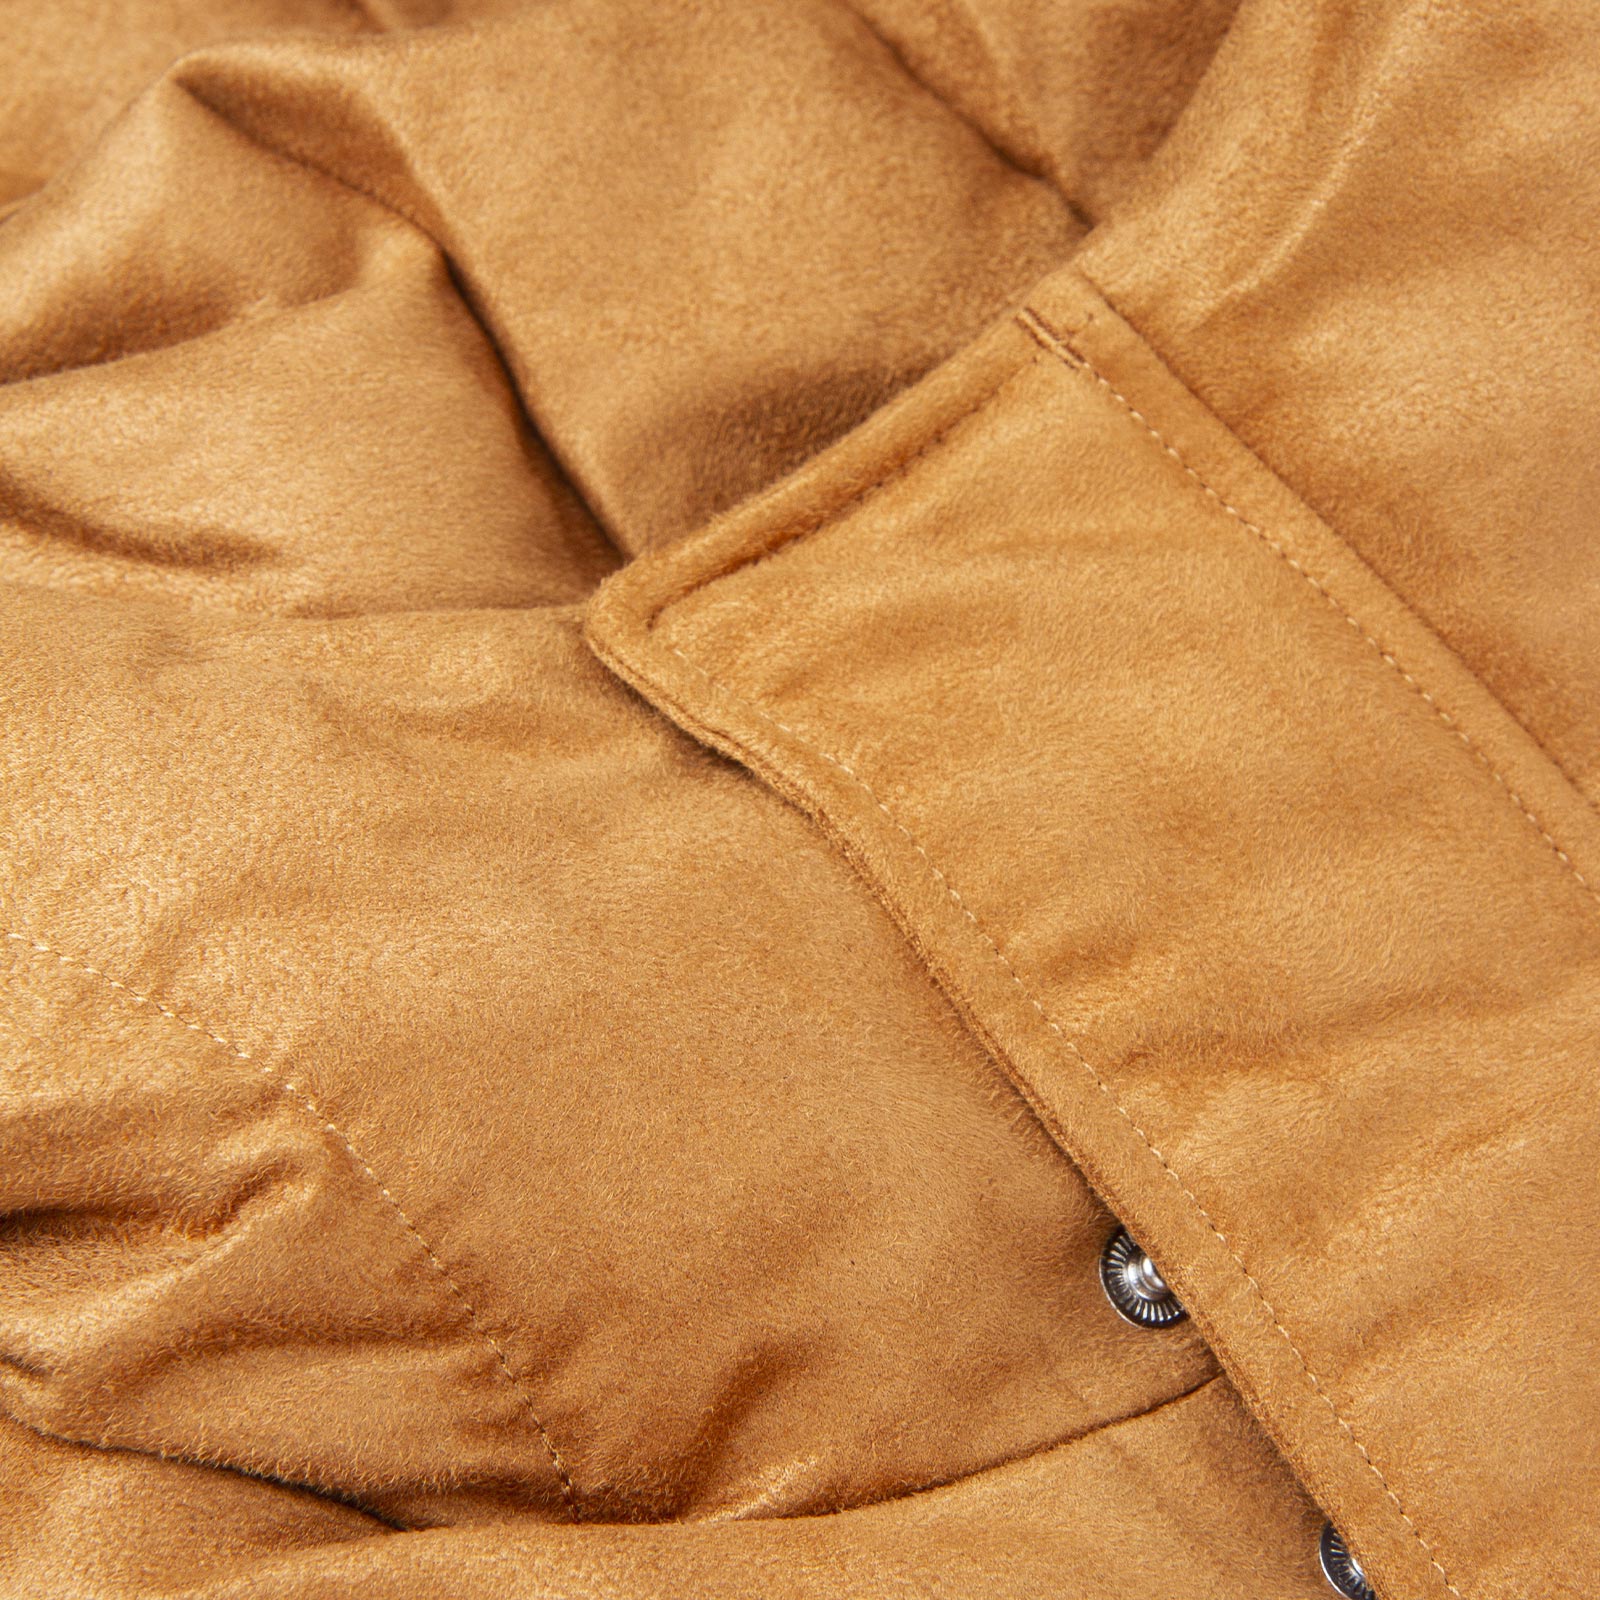 Puma MMQ Faux Leather Down Jacket-SUEDE Store